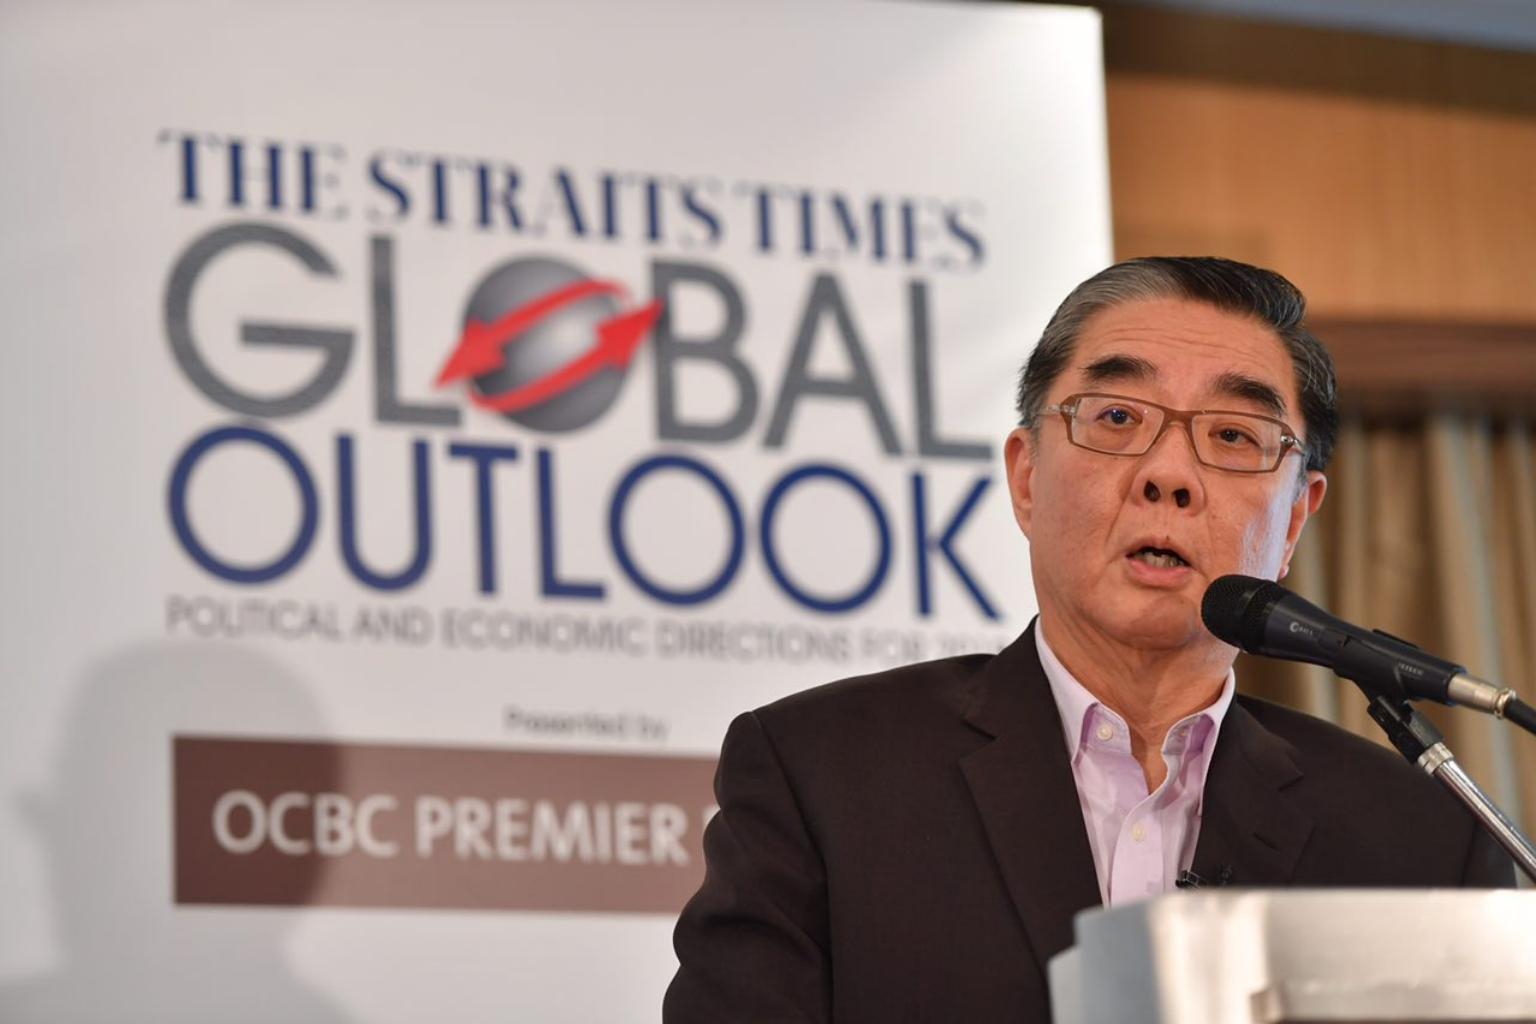 Bright prospects for Malaysian PM Najib in next election with opposition in disarray, say experts at ST Global Outlook Forum, SE Asia News & Top Stories